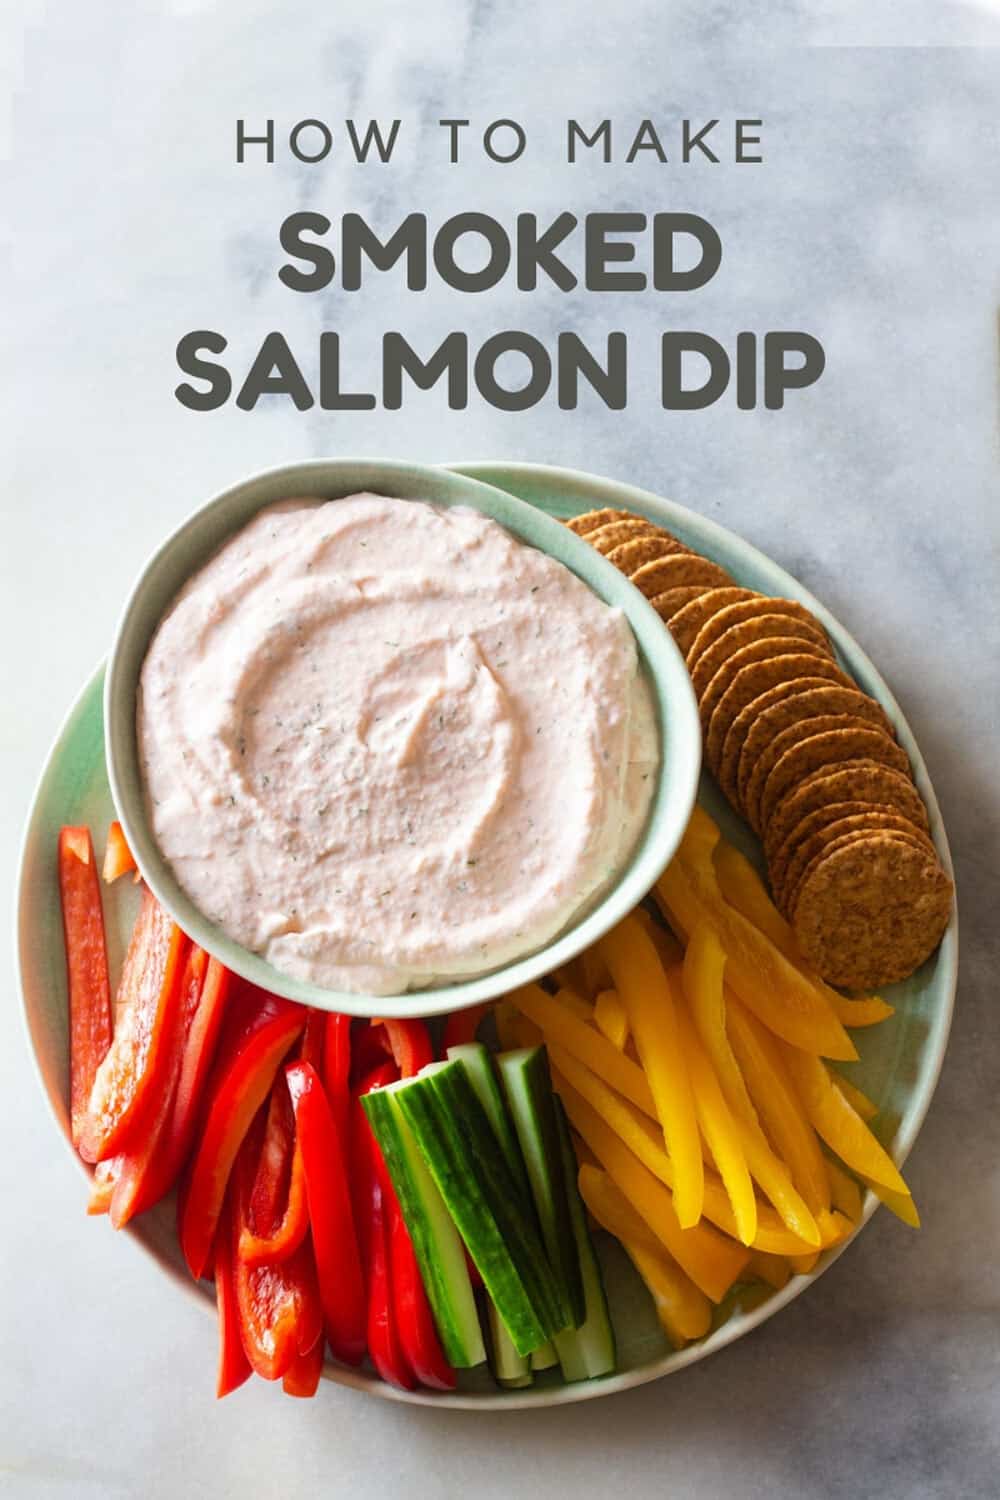 Smoked salmon dip with crackers and raw vegetables arranged on a plate